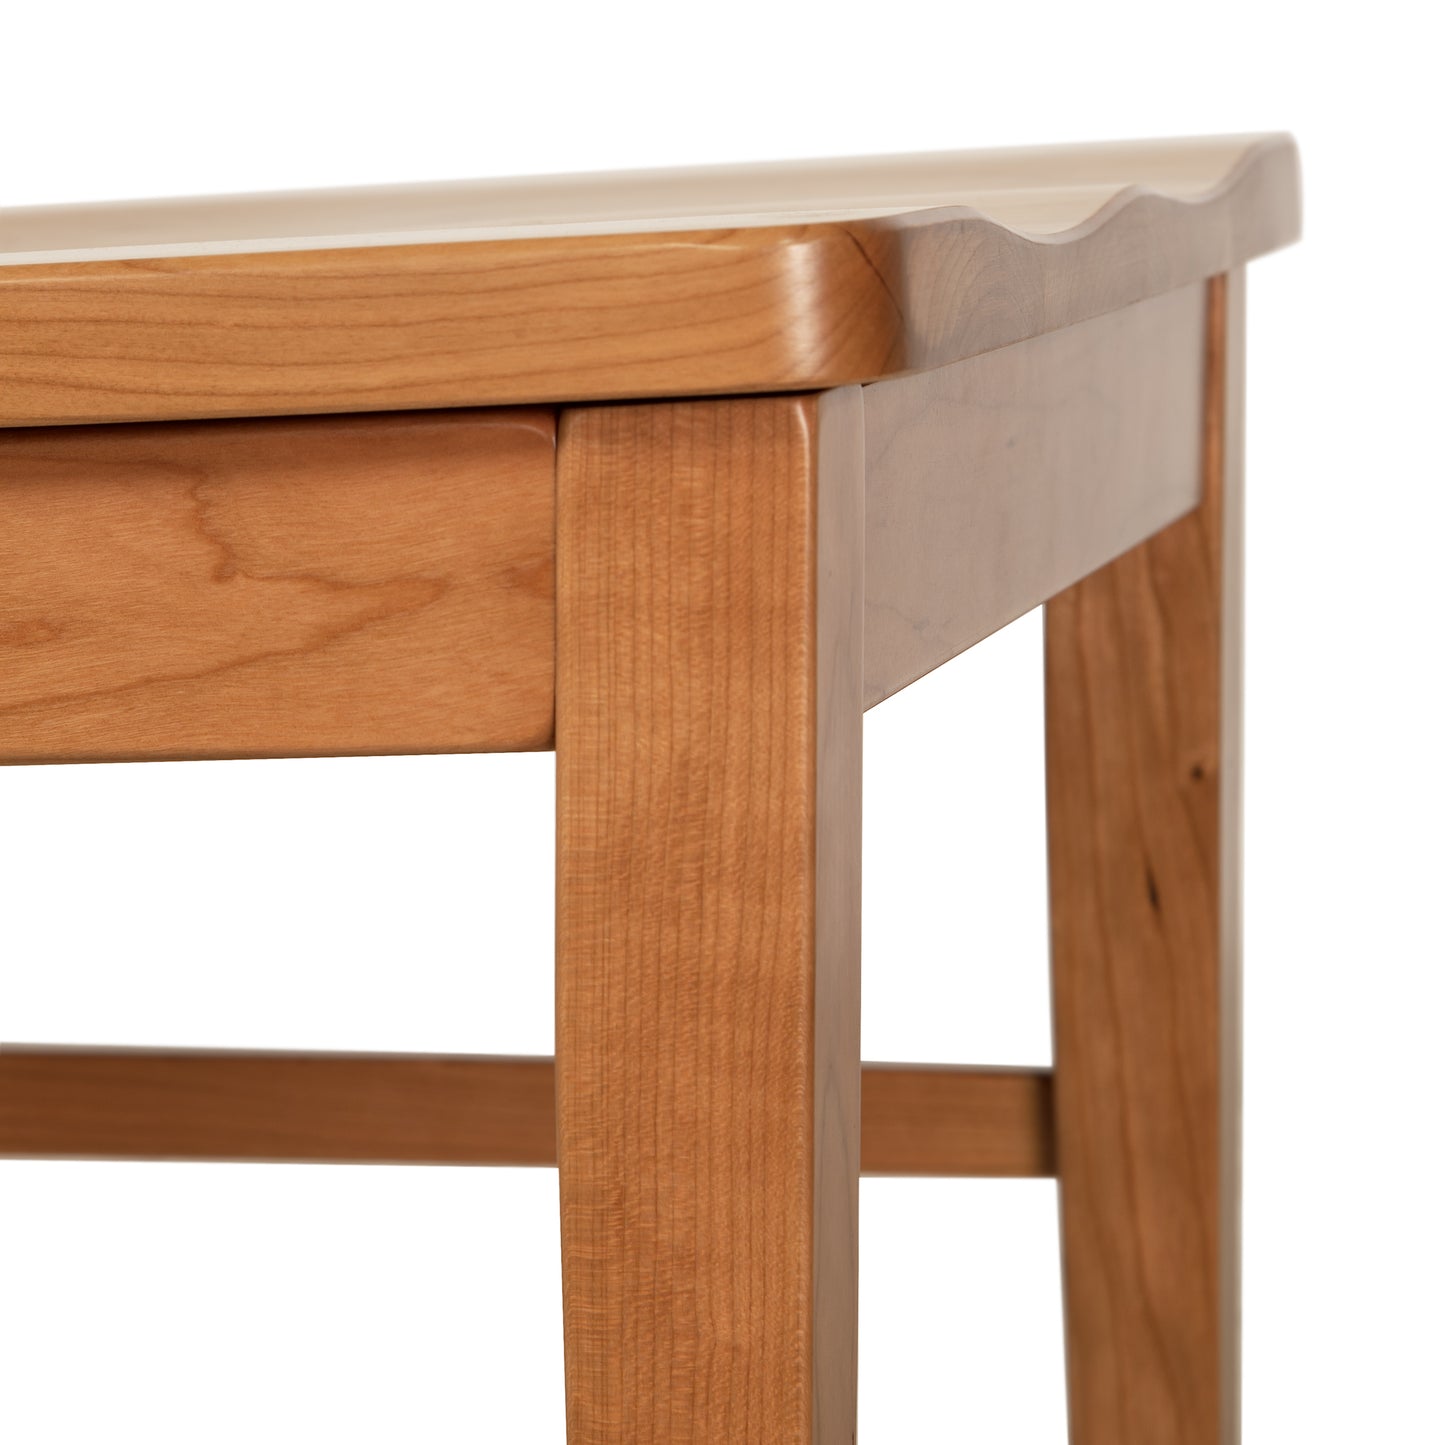 Close-up of a Vermont Woods Studios Country Shaker Chair with Wood Seat showing details of its solid wood construction and the joinery between the tabletop and leg.